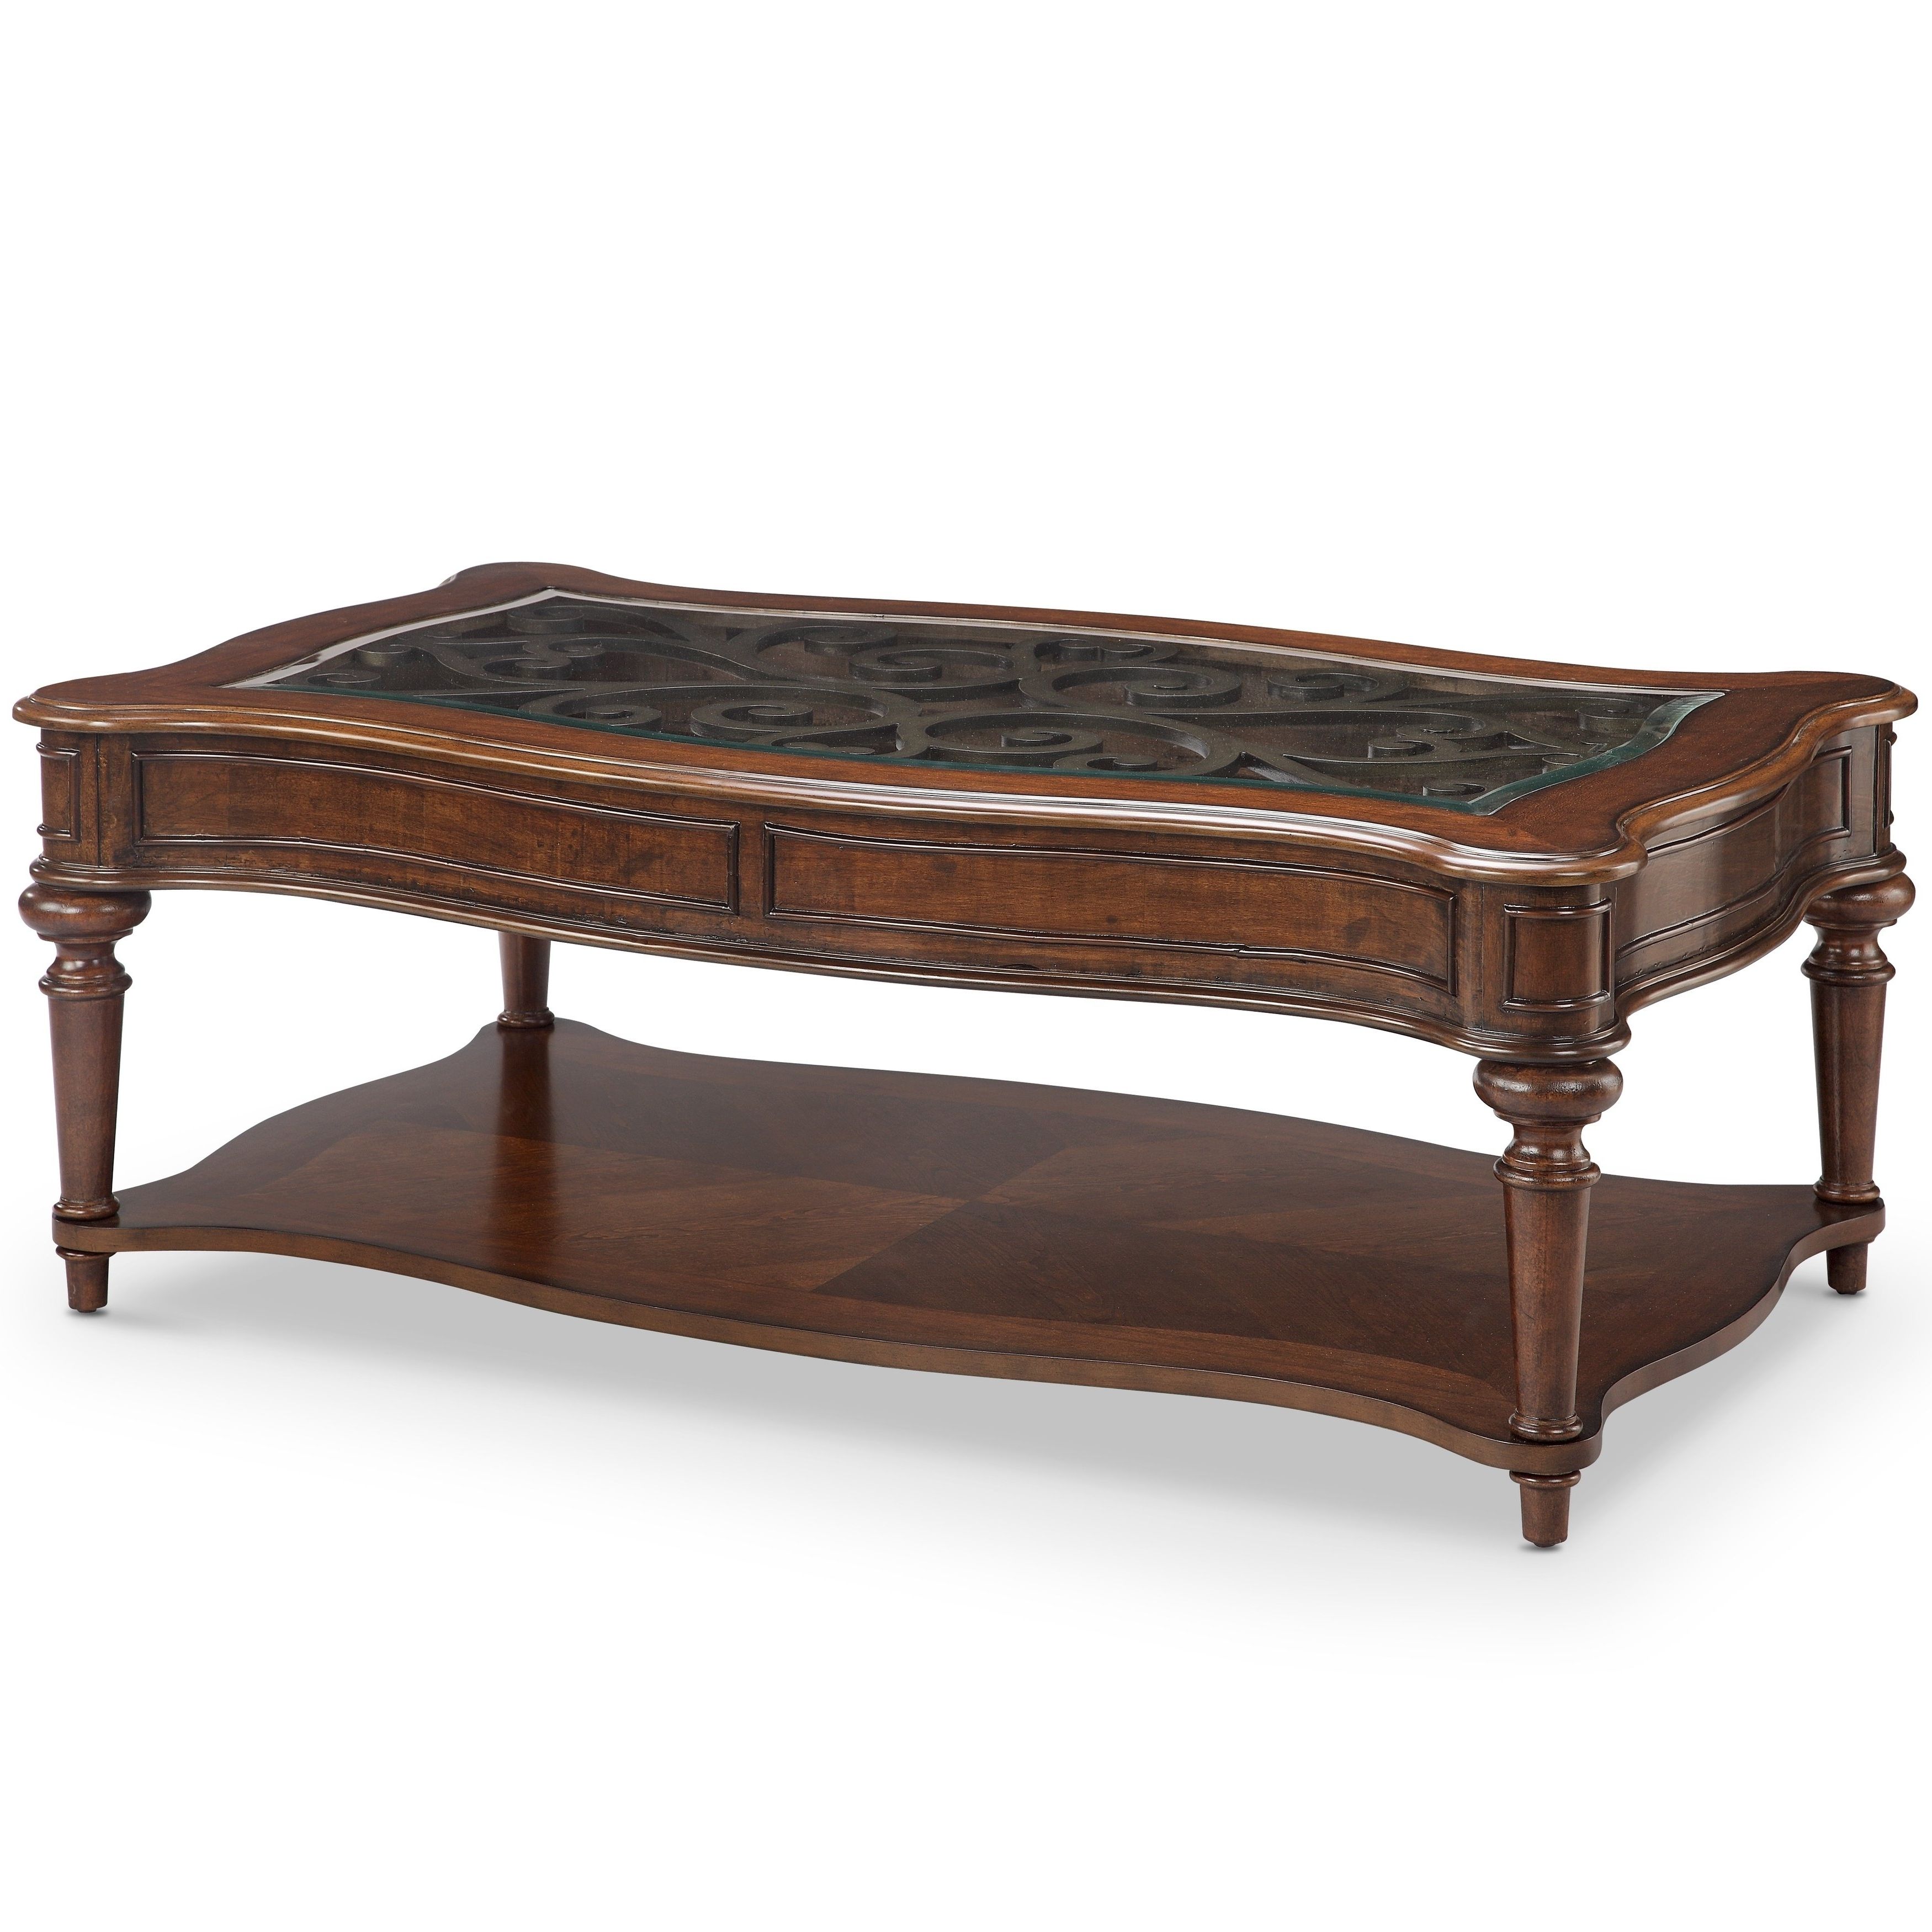 Current Element Ivory Rectangular Coffee Tables Throughout Shop Anastasia Traditional Rectangular Coffee Table With Casters (View 5 of 20)